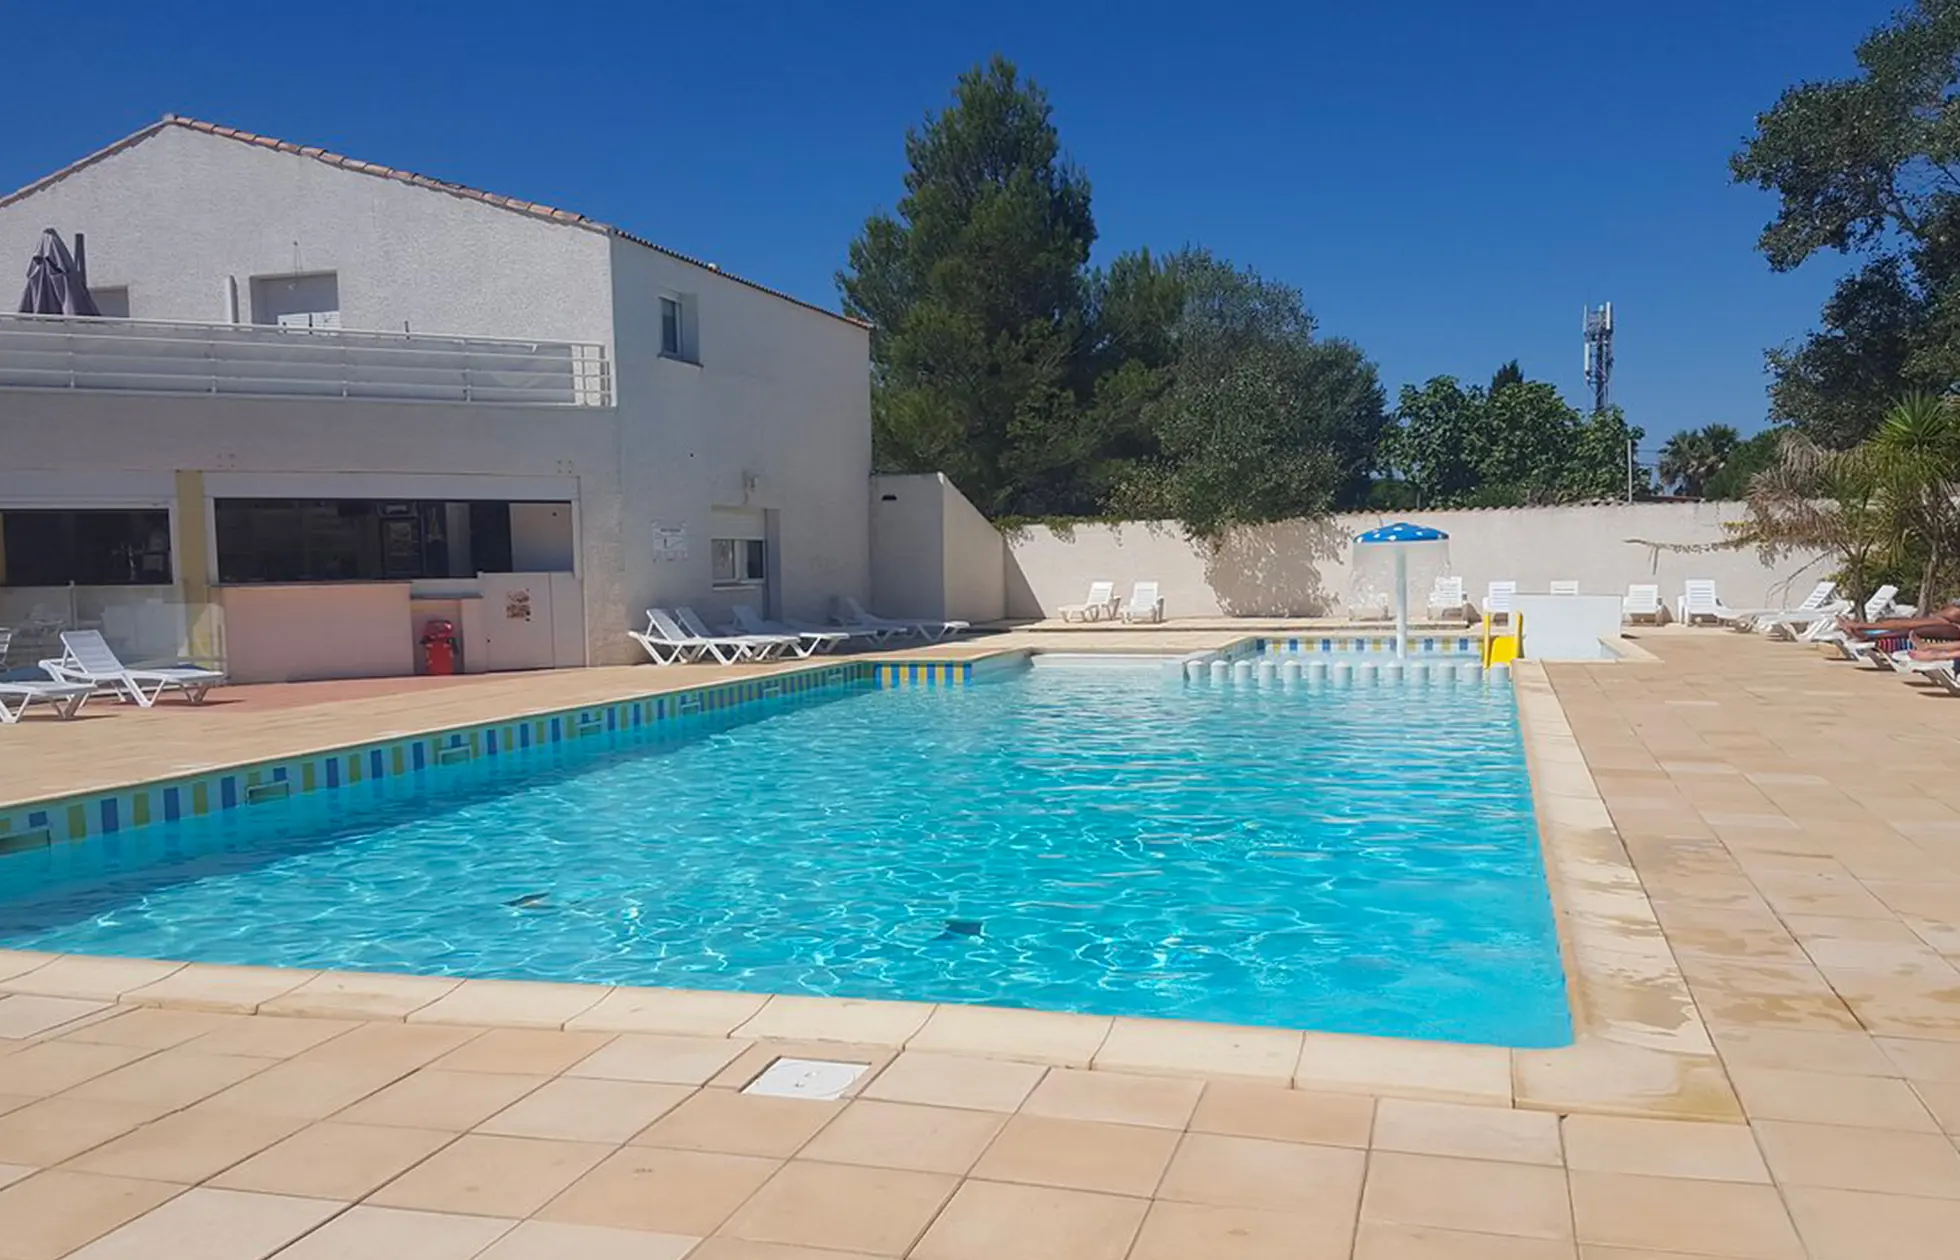 offer ' - '07 - Camping Le Rochelongue - Piscine